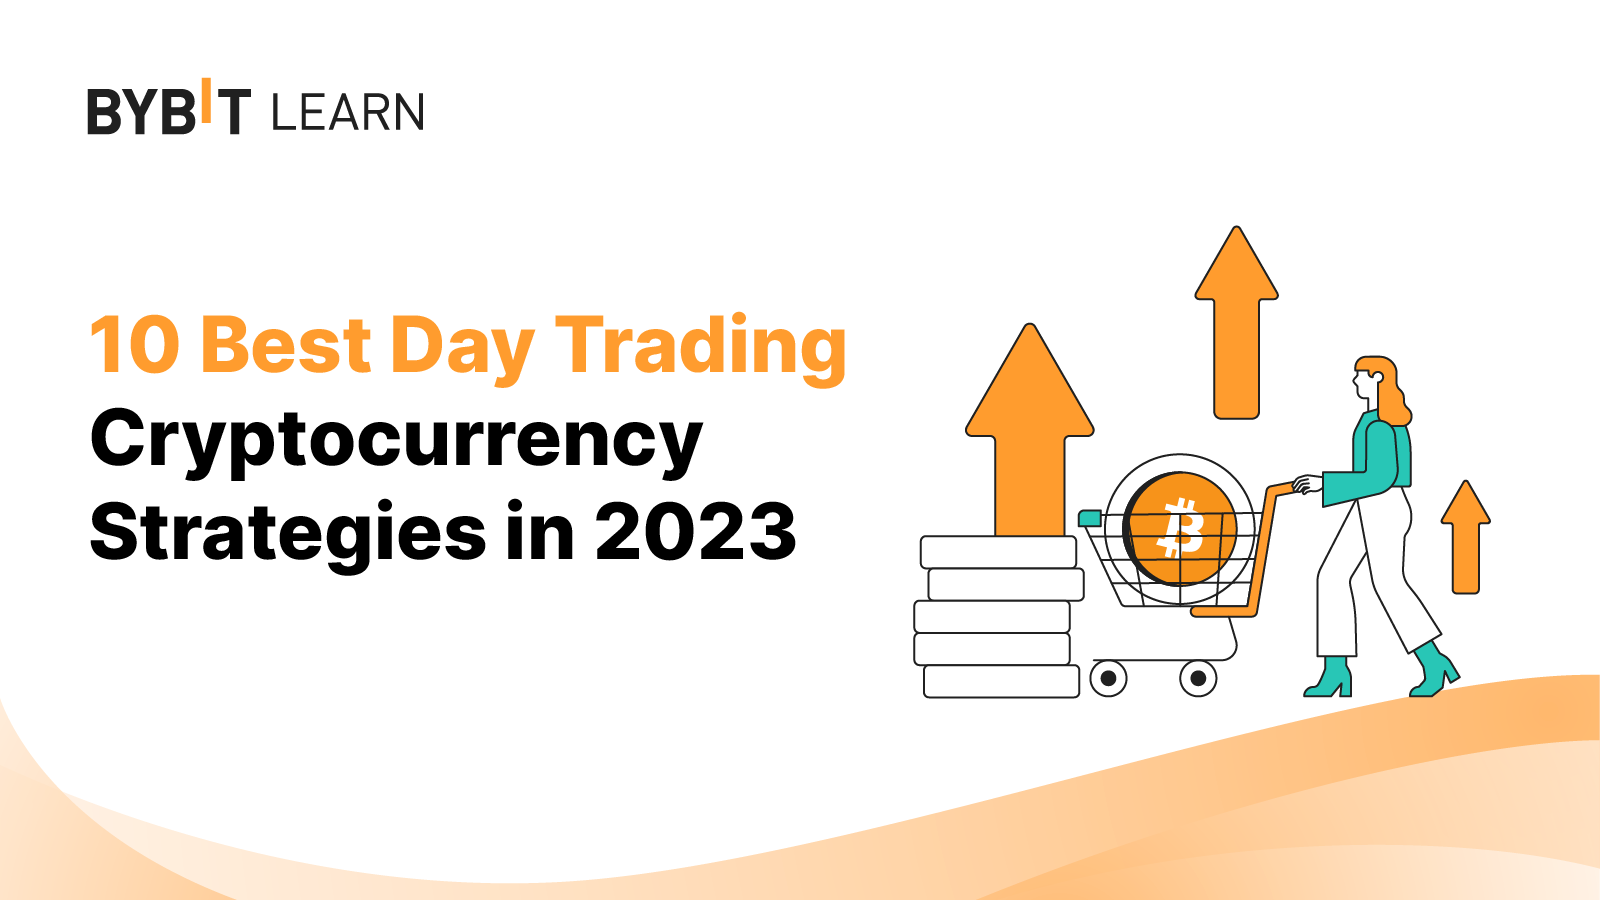 10 best day trading cryptocurrency strategies in 2023.